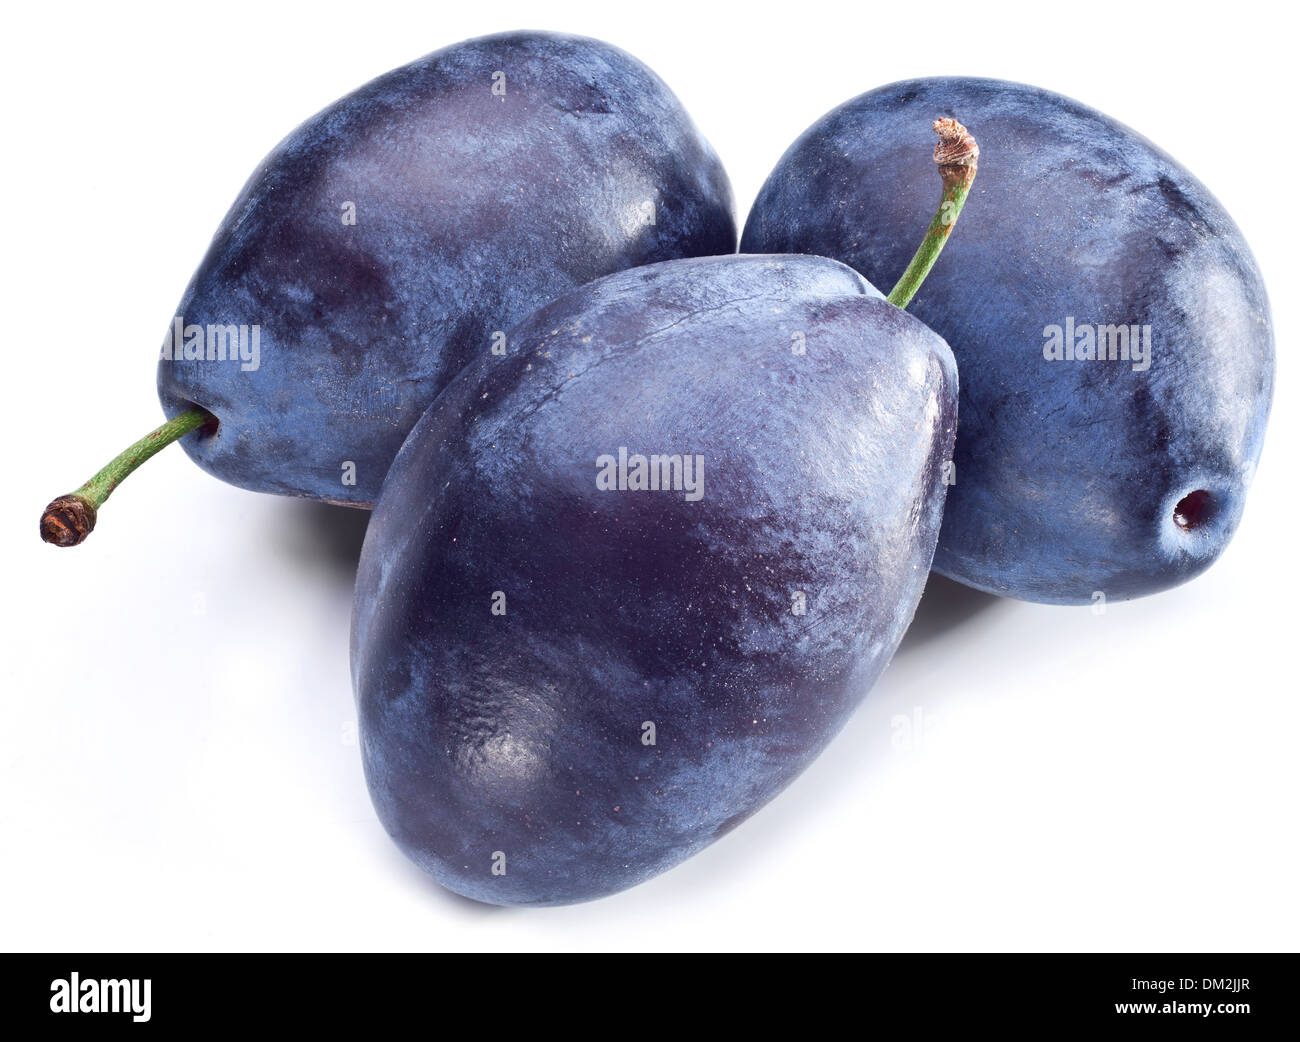 Three plums with leaf isolated on a white background. Stock Photo